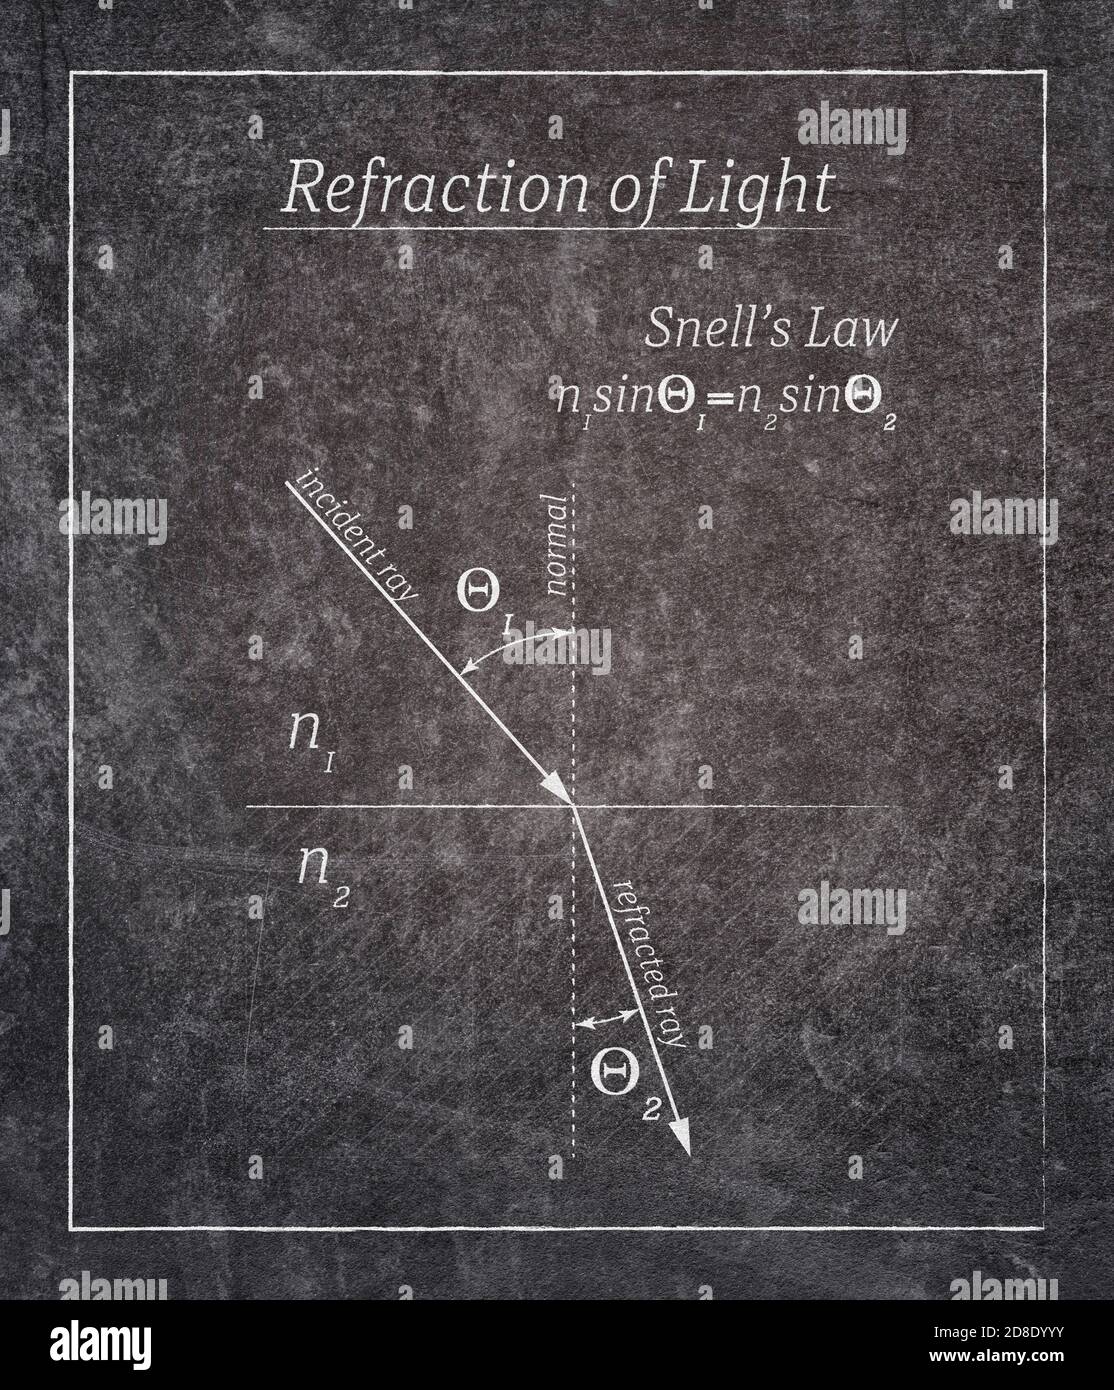 refraction of light law definition written on black chalkboard with simple frame Stock Photo